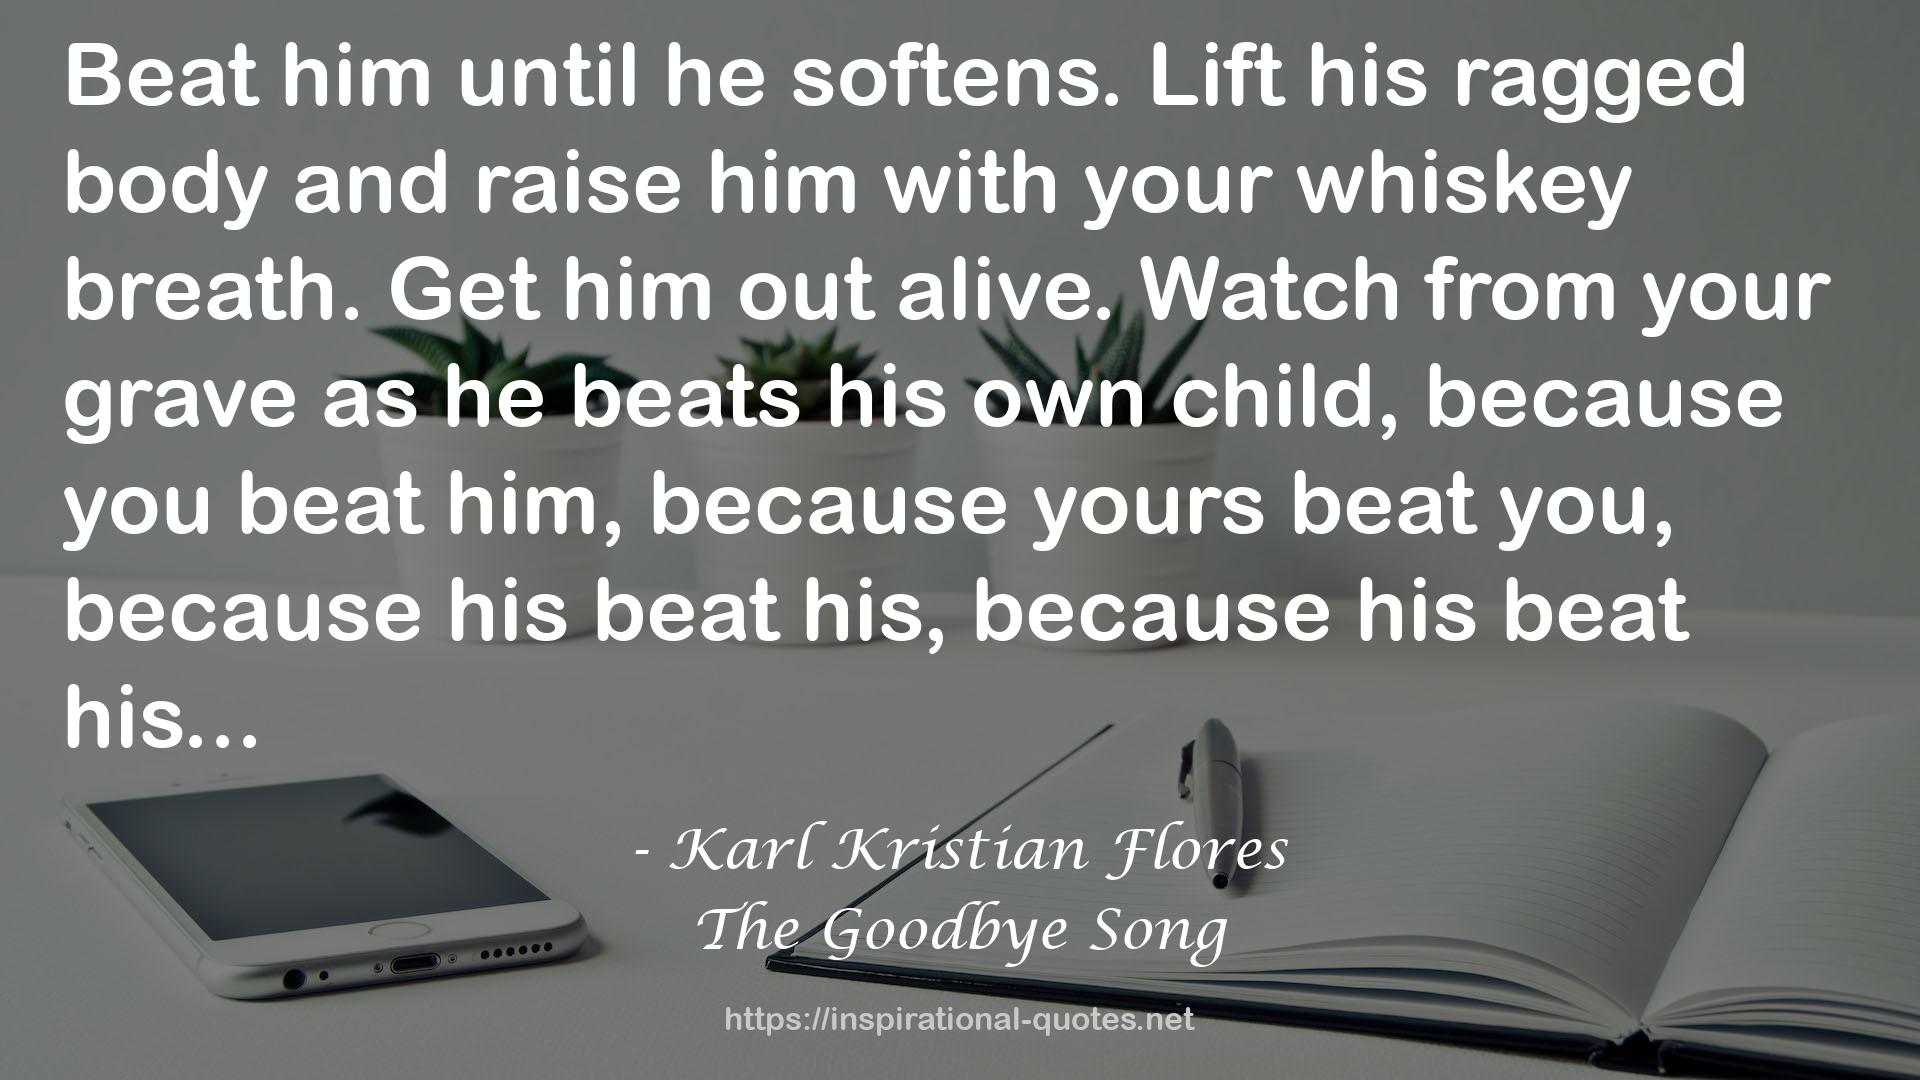 Karl Kristian Flores QUOTES